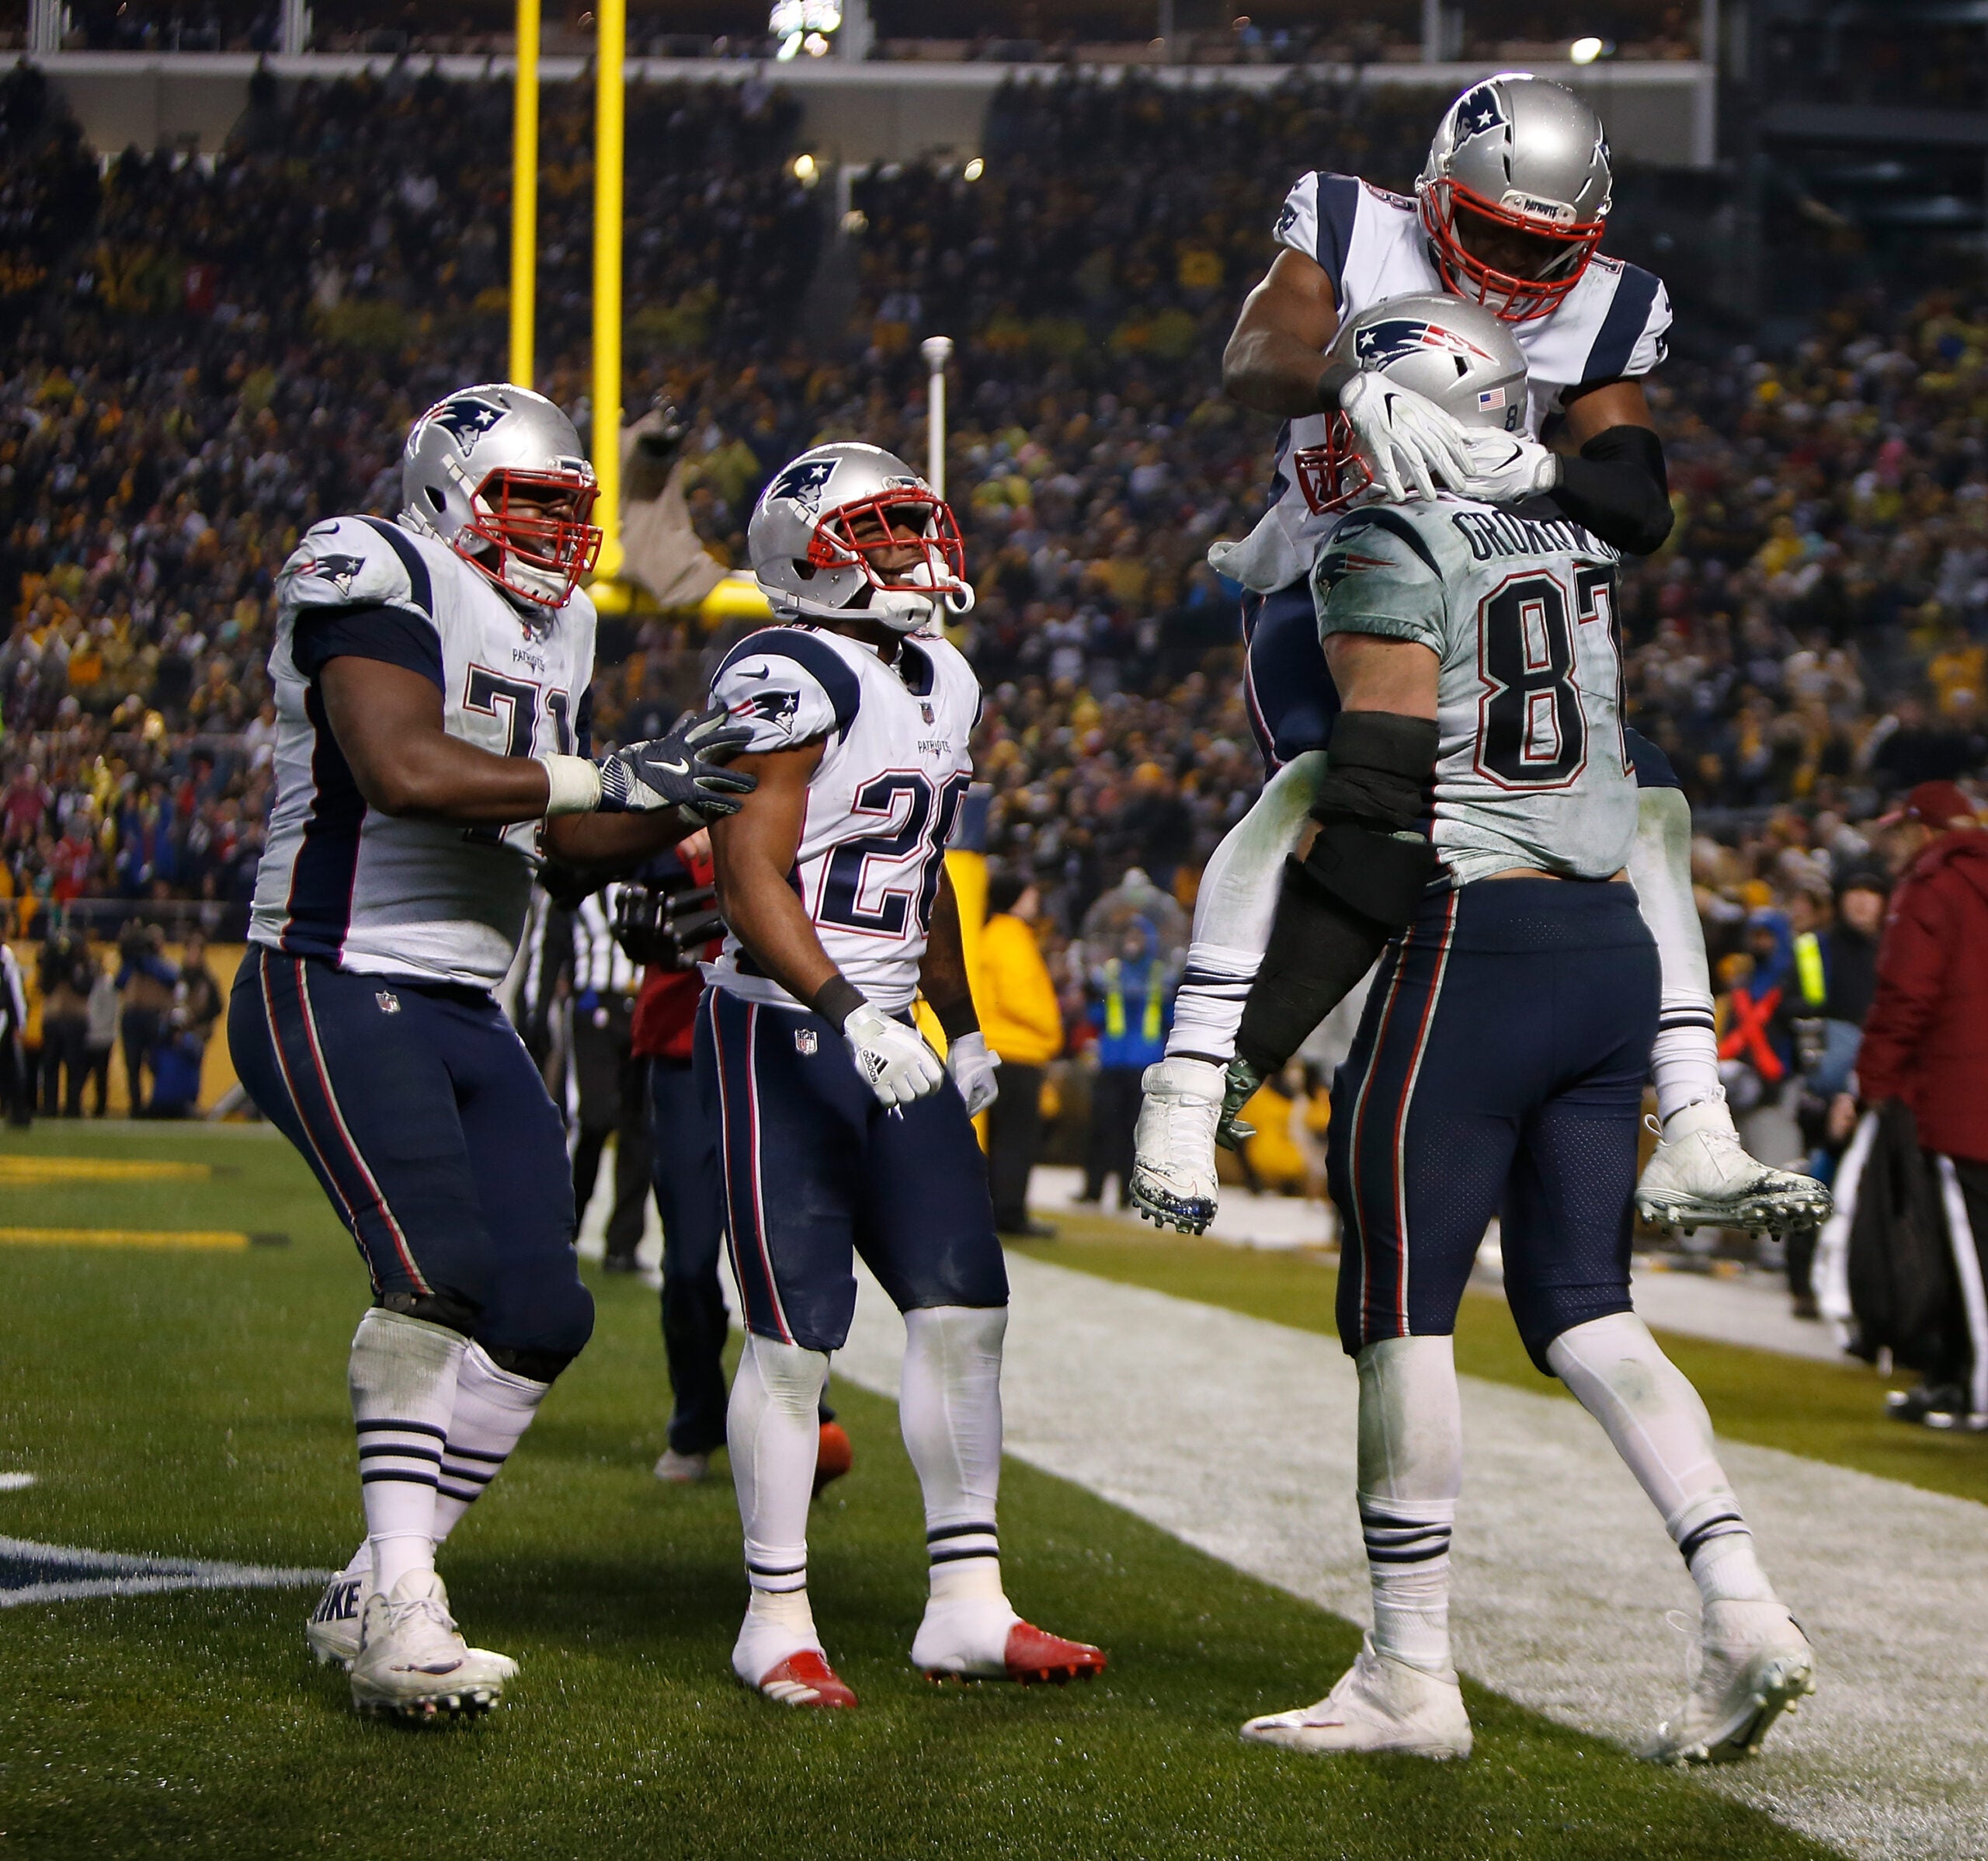 Gronk Was The Most Efficient Receiver We've Seen